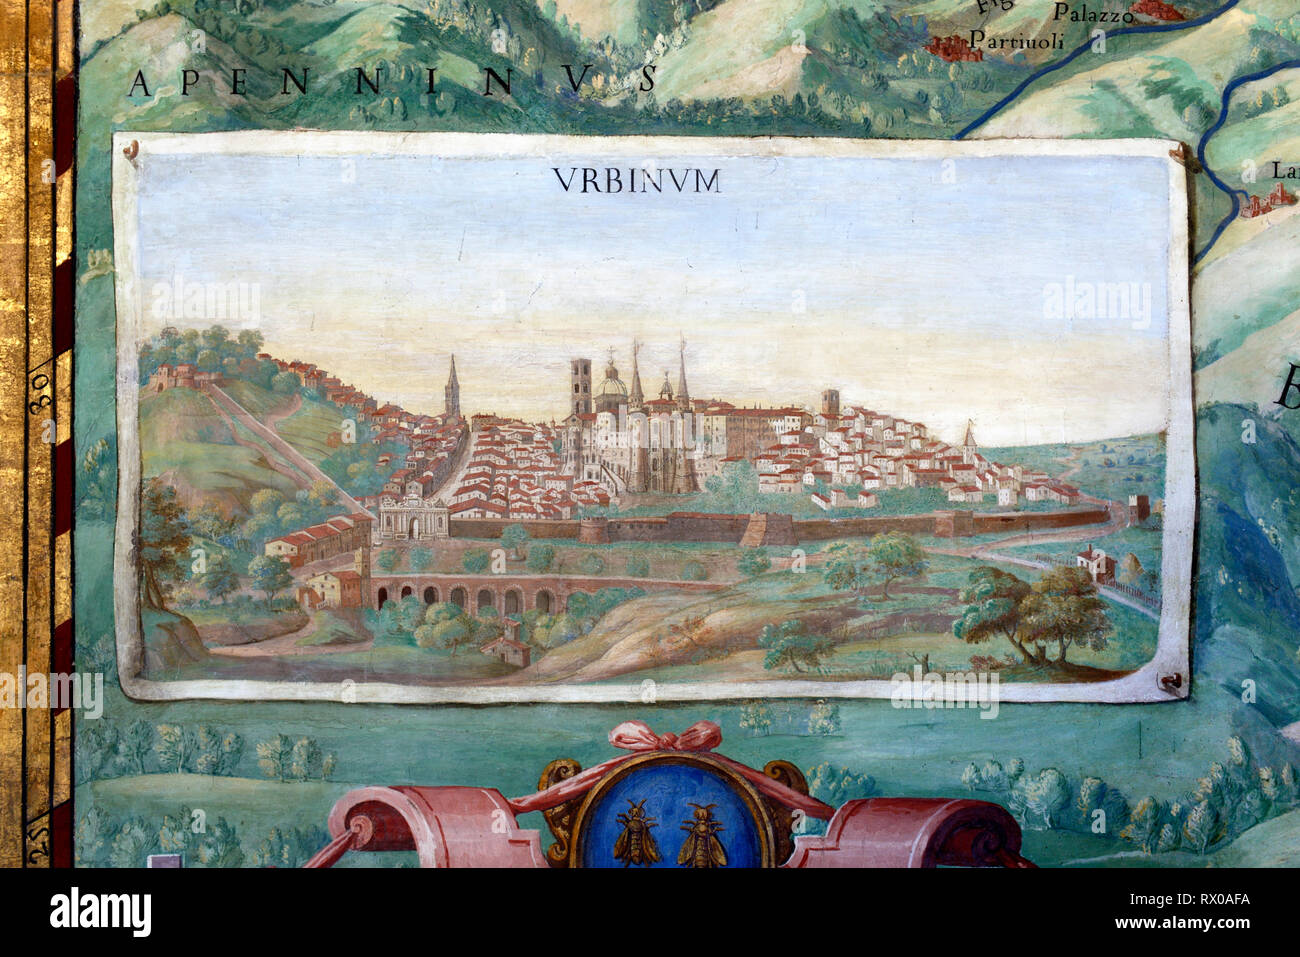 Old Map or Historic View of Urbino Italy. Fresco or Wall Painting in Gallery of Maps (1580-83) based on Drawings by Ignazio Danti Vatican Museums Stock Photo